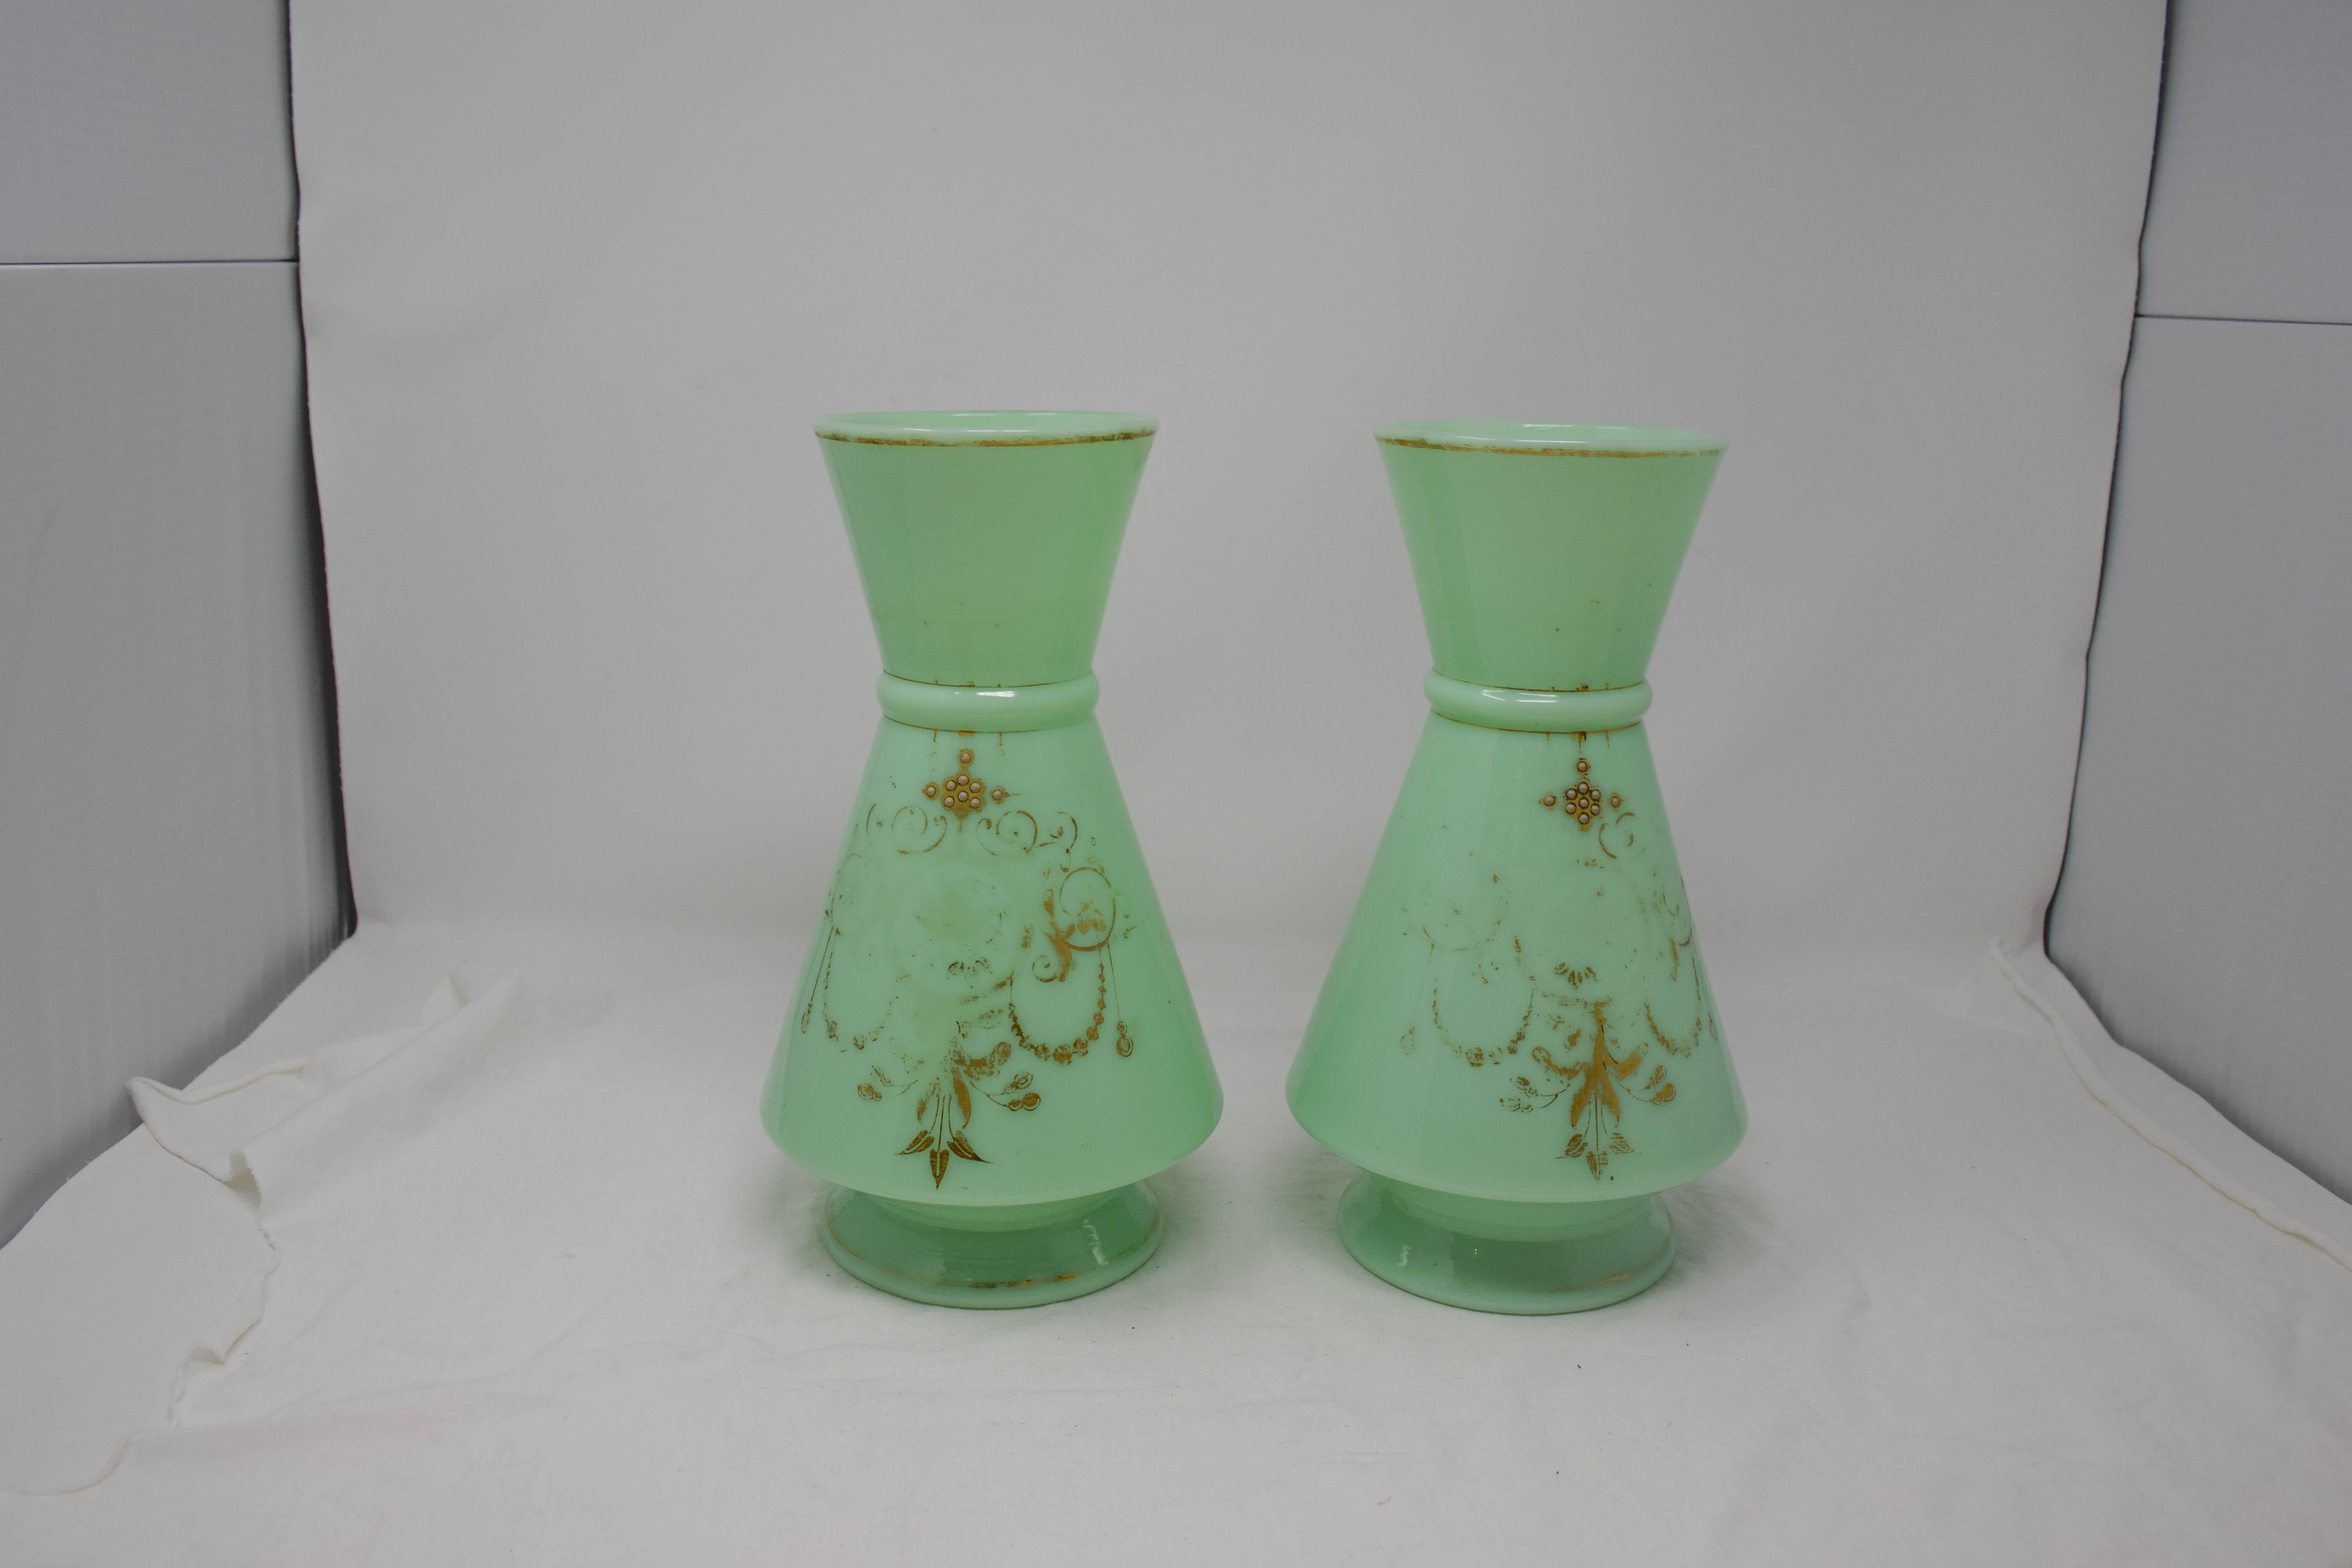 Opaline green glass set of 2. From France. Beautiful pair to use as a stand alone decoration or in the traditional manner with flowers.